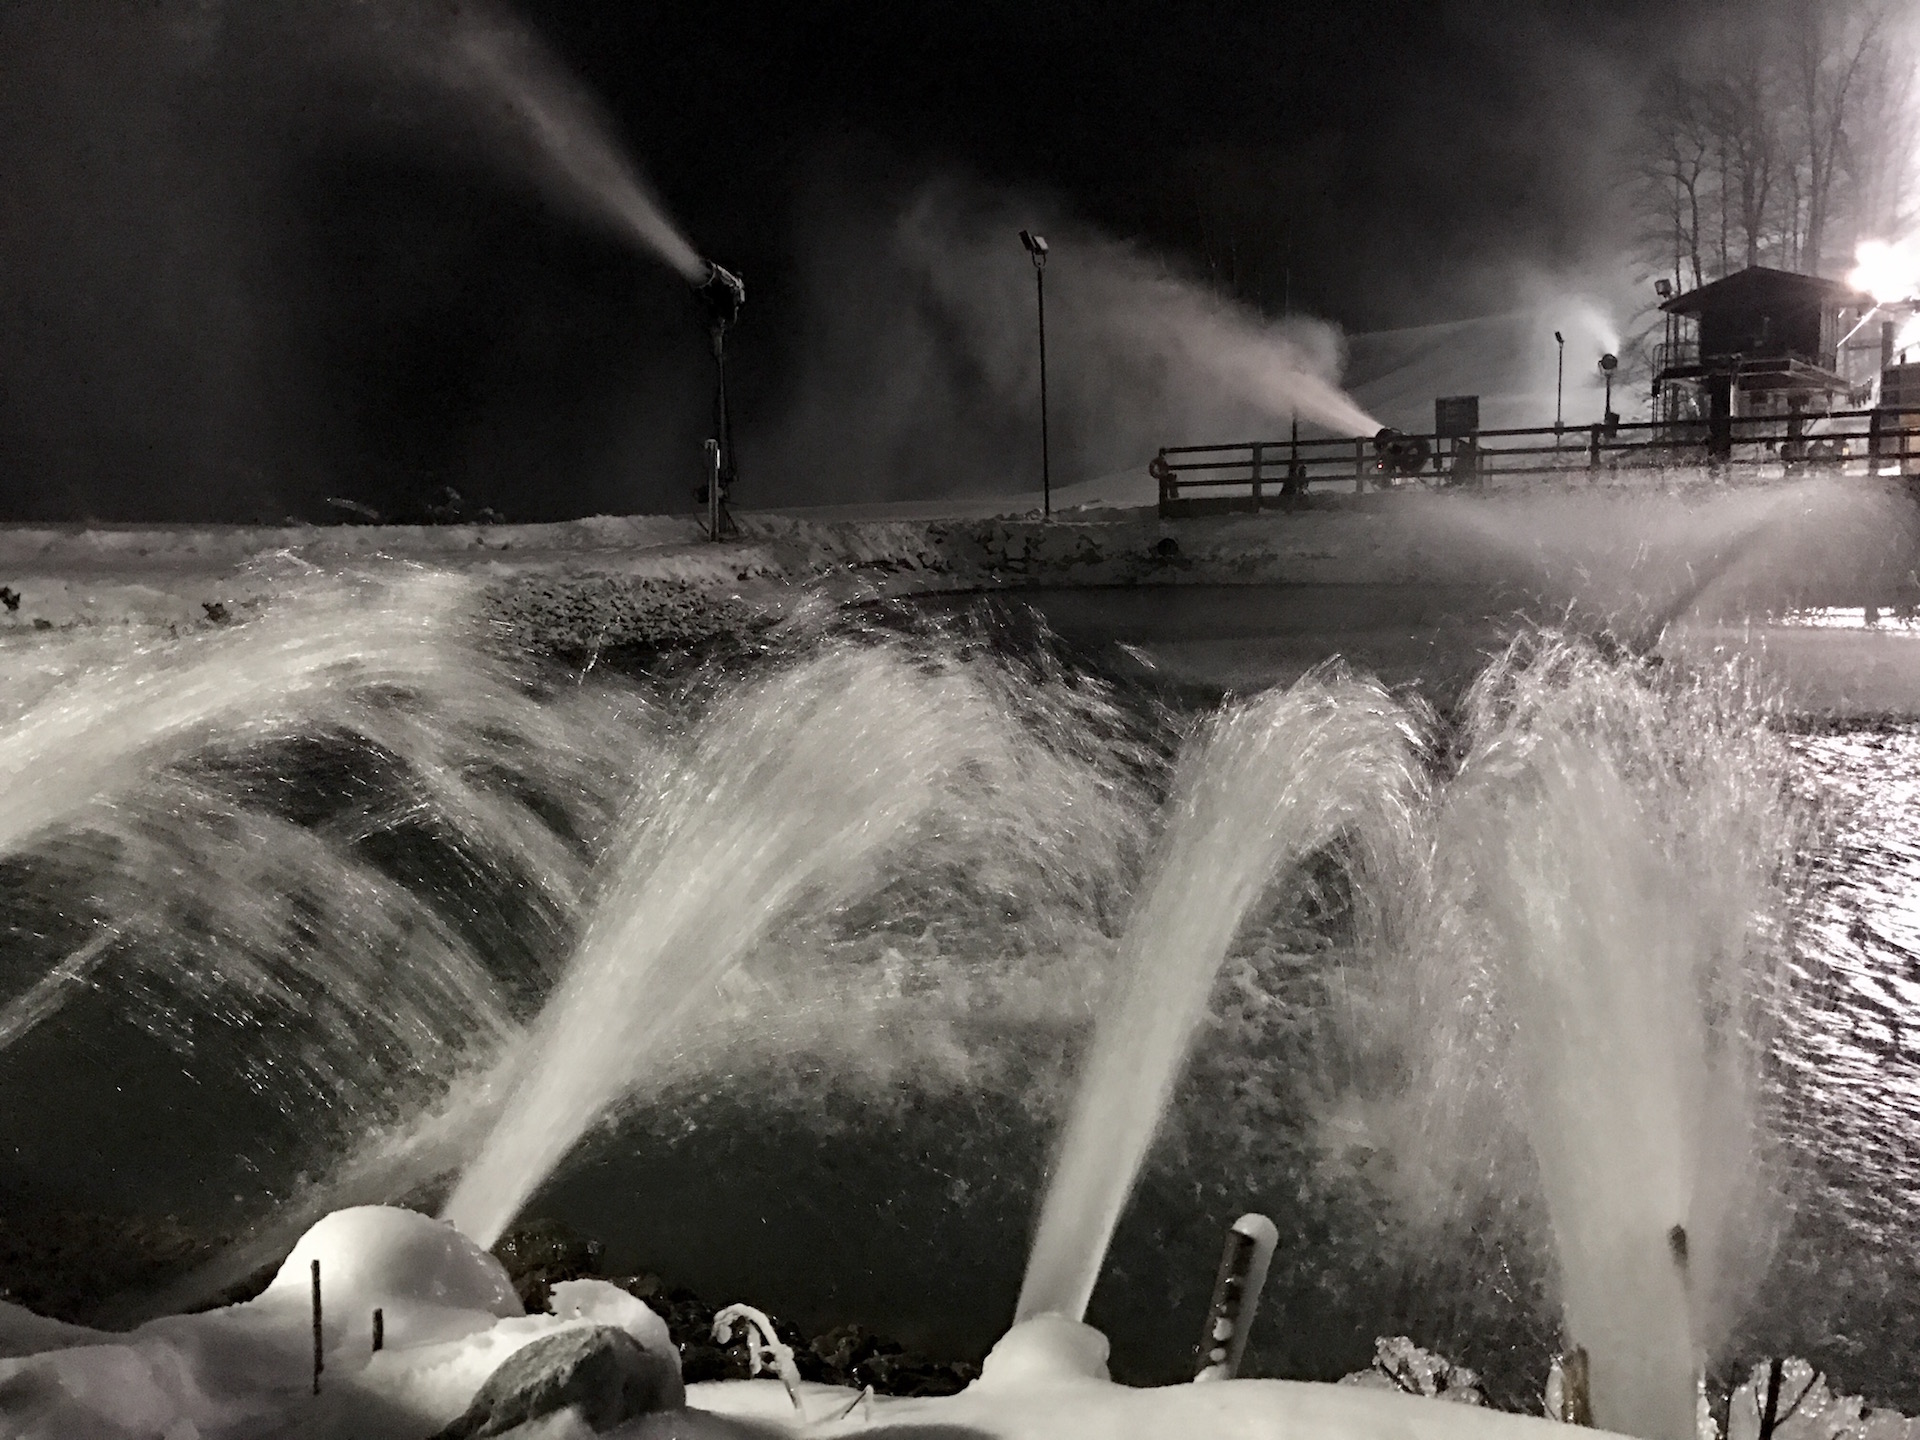 Pumping water for snowmaking into holding pond with snow guns in action on Tubing Park at Snow Trails in Mansfield, Ohio